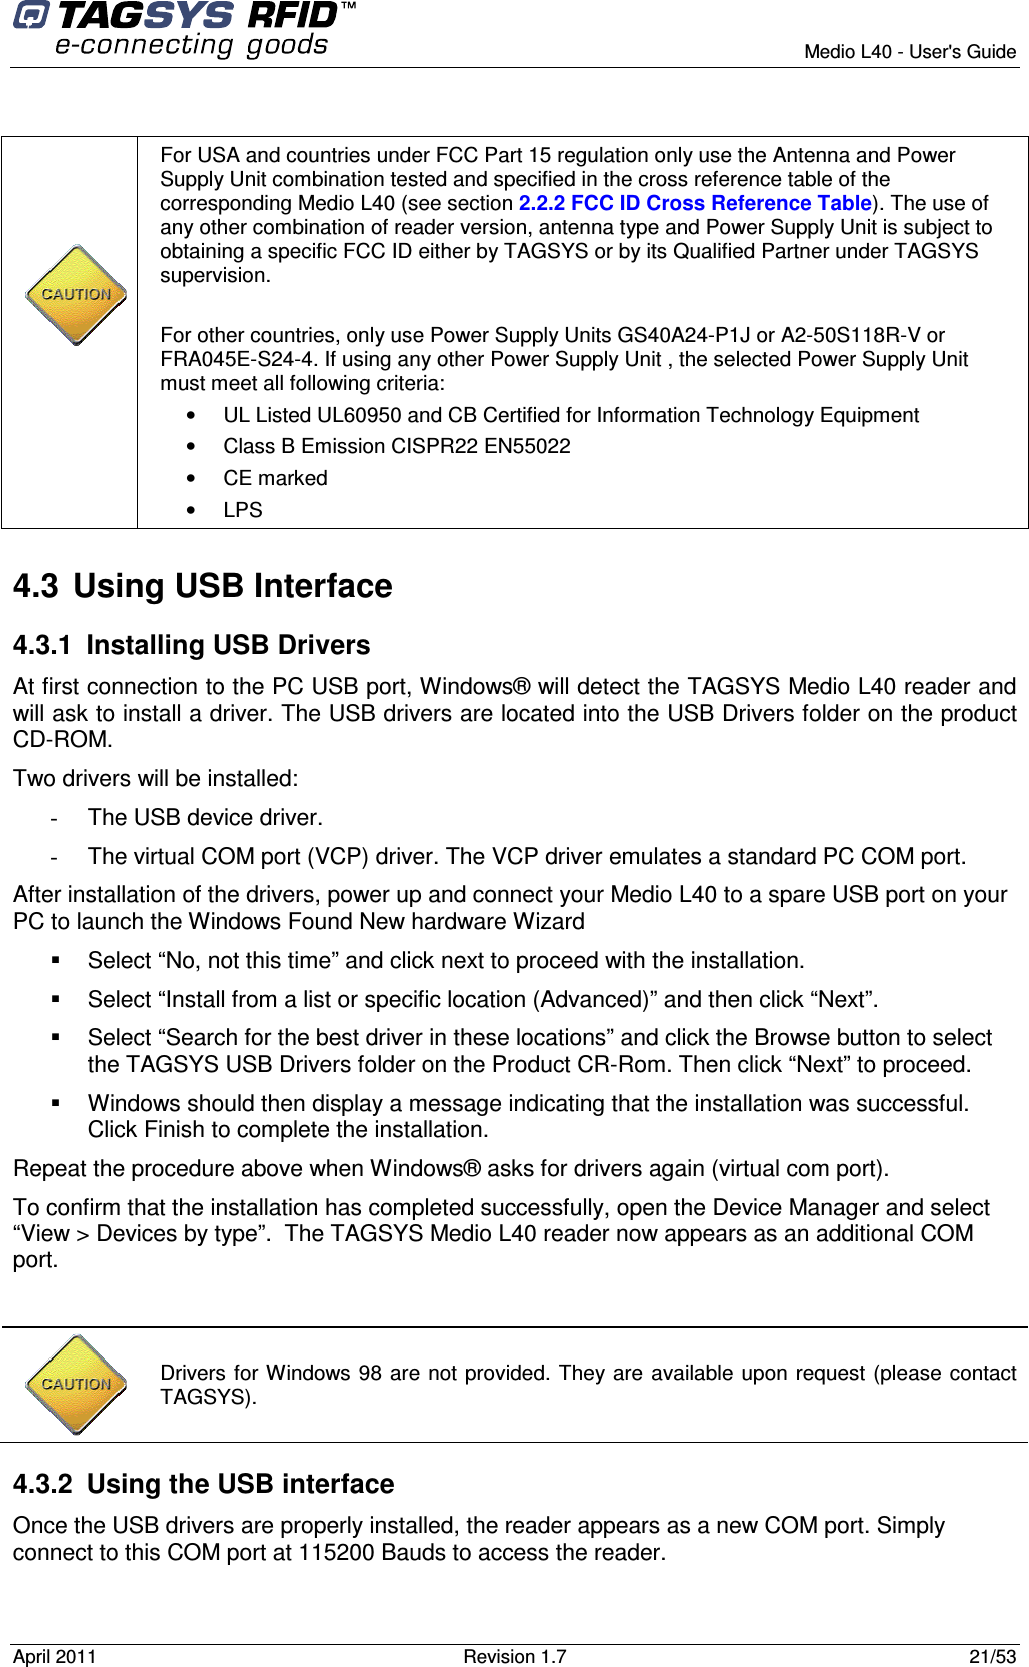        Medio L40 - User&apos;s Guide April 2011  Revision 1.7  21/53         For USA and countries under FCC Part 15 regulation only use the Antenna and Power Supply Unit combination tested and specified in the cross reference table of the corresponding Medio L40 (see section 2.2.2 FCC ID Cross Reference Table). The use of any other combination of reader version, antenna type and Power Supply Unit is subject to obtaining a specific FCC ID either by TAGSYS or by its Qualified Partner under TAGSYS supervision.  For other countries, only use Power Supply Units GS40A24-P1J or A2-50S118R-V or FRA045E-S24-4. If using any other Power Supply Unit , the selected Power Supply Unit must meet all following criteria:  •  UL Listed UL60950 and CB Certified for Information Technology Equipment •  Class B Emission CISPR22 EN55022 •  CE marked •  LPS 4.3  Using USB Interface 4.3.1  Installing USB Drivers At first connection to the PC USB port, Windows® will detect the TAGSYS Medio L40 reader and will ask to install a driver. The USB drivers are located into the USB Drivers folder on the product CD-ROM. Two drivers will be installed: -  The USB device driver. -  The virtual COM port (VCP) driver. The VCP driver emulates a standard PC COM port. After installation of the drivers, power up and connect your Medio L40 to a spare USB port on your PC to launch the Windows Found New hardware Wizard   Select “No, not this time” and click next to proceed with the installation.   Select “Install from a list or specific location (Advanced)” and then click “Next”.   Select “Search for the best driver in these locations” and click the Browse button to select the TAGSYS USB Drivers folder on the Product CR-Rom. Then click “Next” to proceed.   Windows should then display a message indicating that the installation was successful. Click Finish to complete the installation. Repeat the procedure above when Windows® asks for drivers again (virtual com port). To confirm that the installation has completed successfully, open the Device Manager and select “View &gt; Devices by type”.  The TAGSYS Medio L40 reader now appears as an additional COM port.   4.3.2  Using the USB interface Once the USB drivers are properly installed, the reader appears as a new COM port. Simply connect to this COM port at 115200 Bauds to access the reader.   Drivers for Windows 98 are not provided. They are available upon request (please contact TAGSYS). 